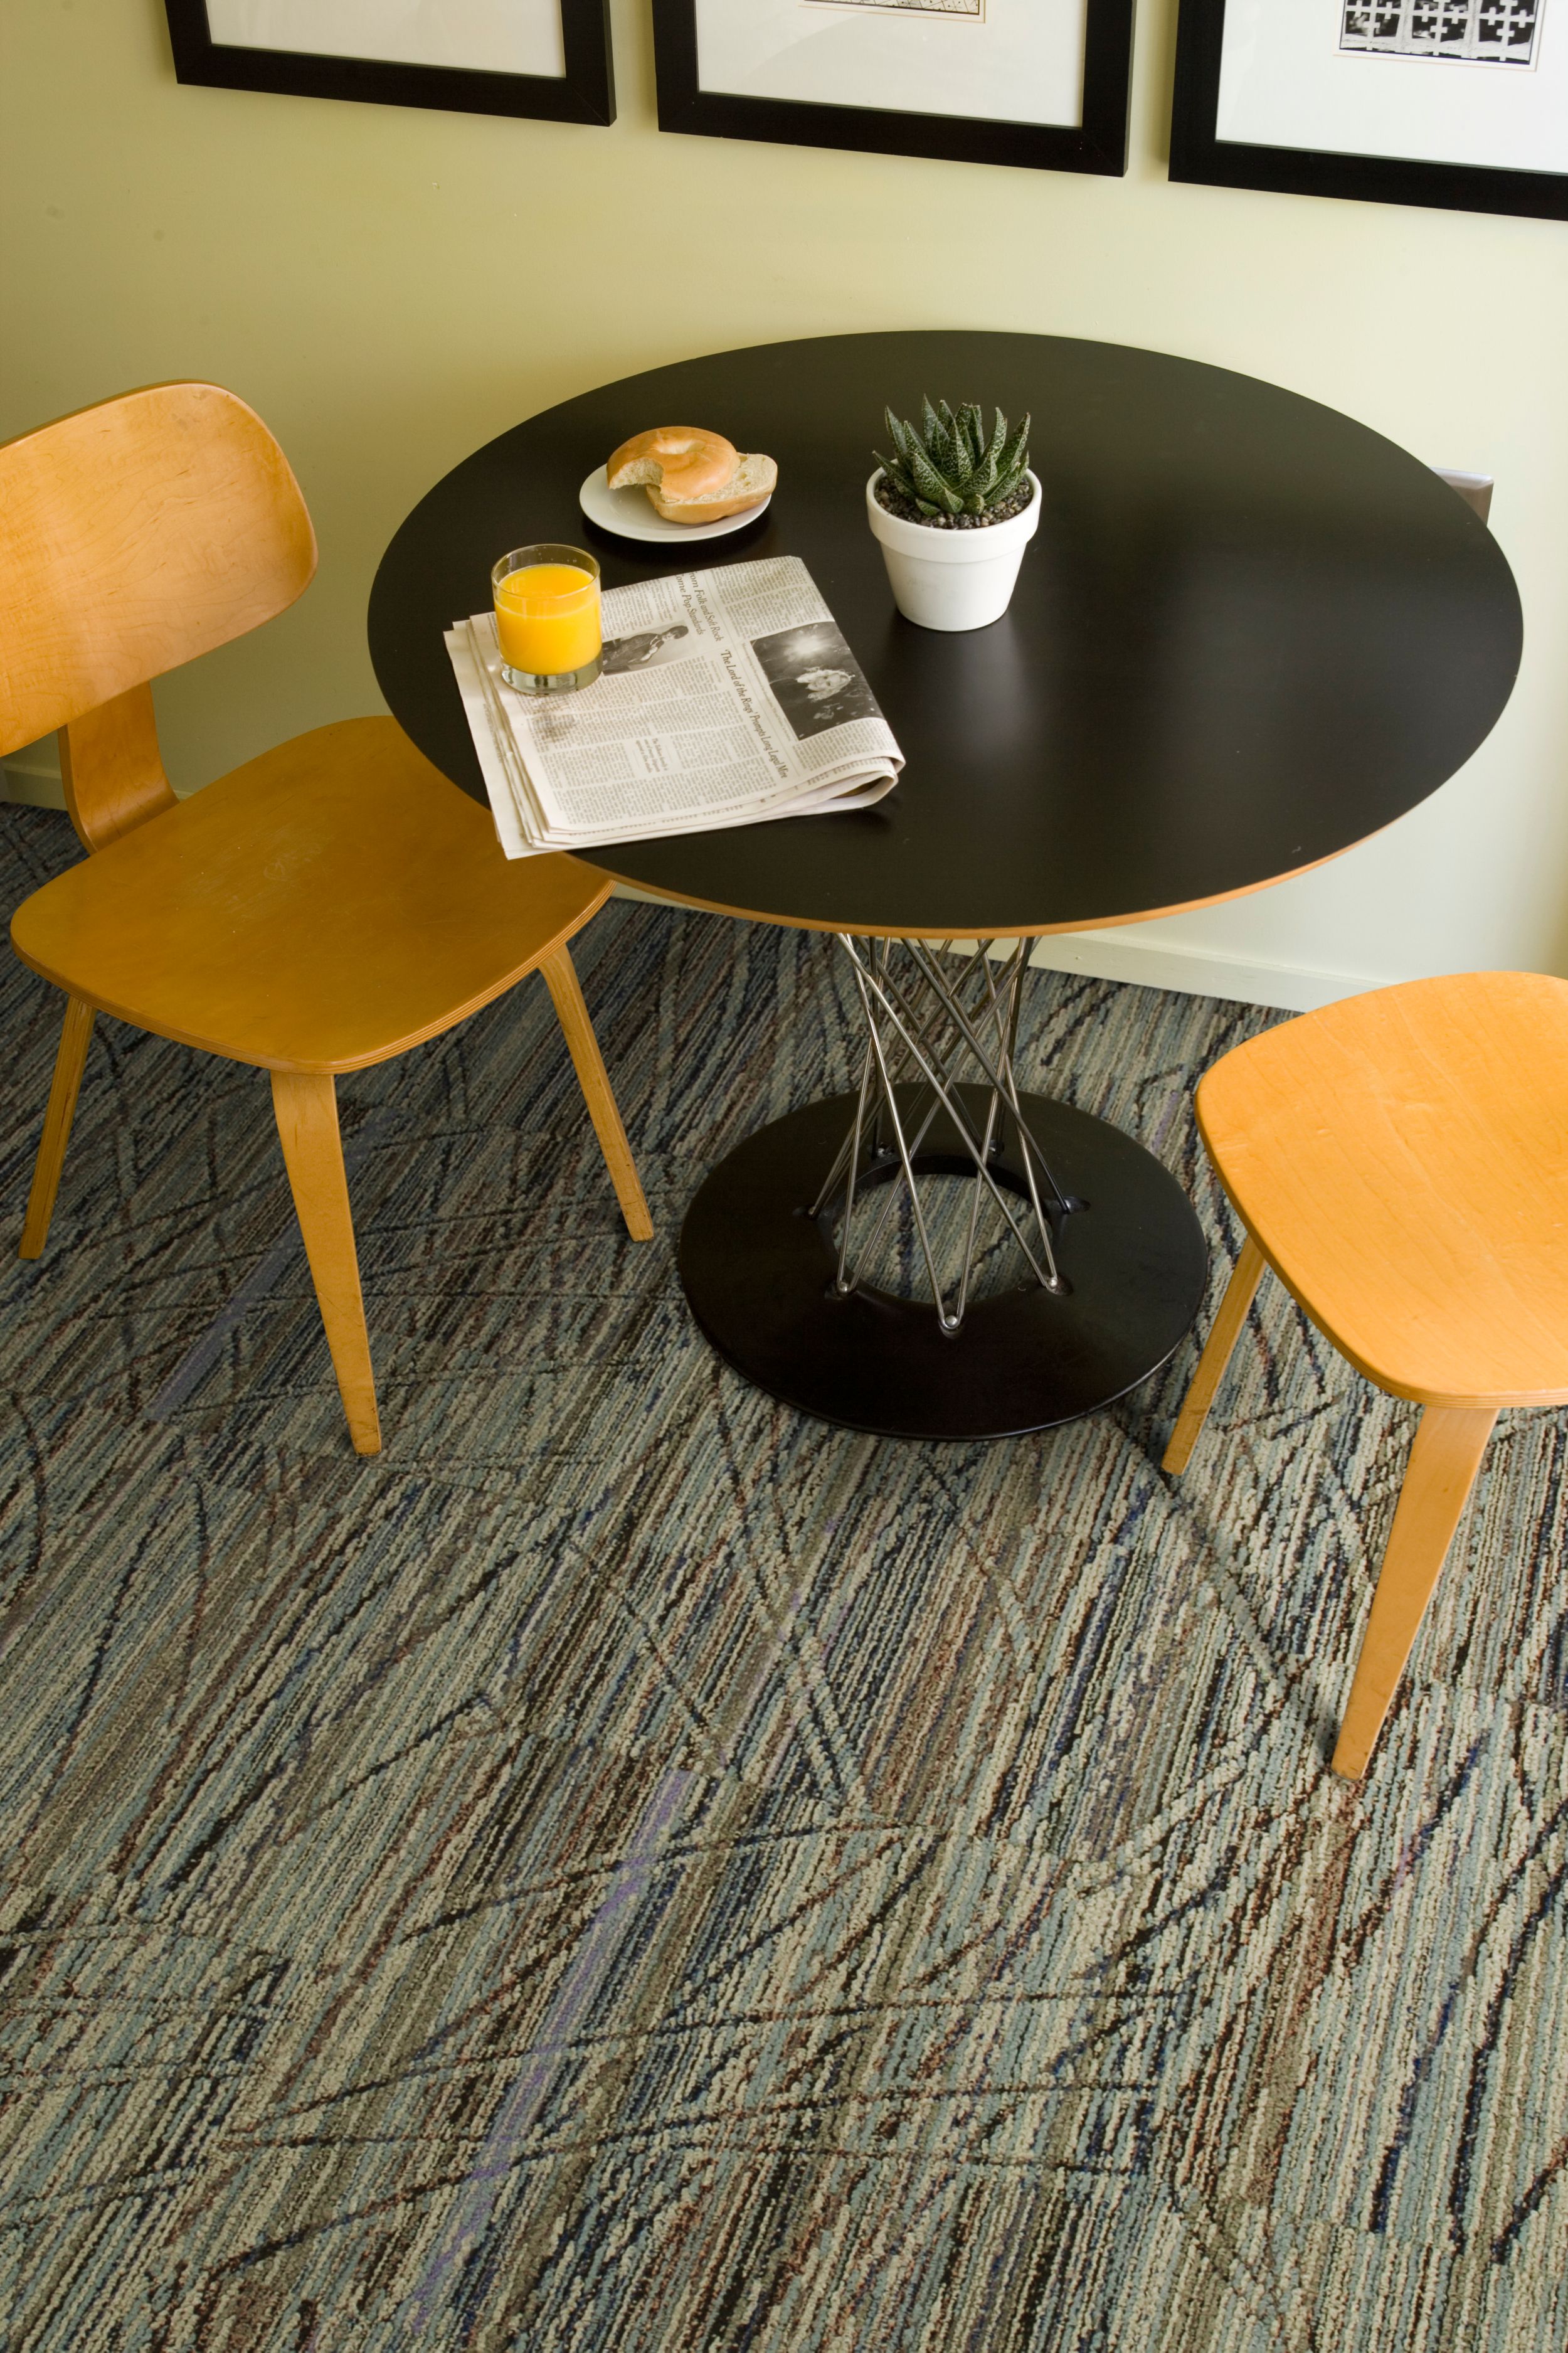 Detail of Interface Prairie Grass carpet tile in break area with table and two chairs image number 9